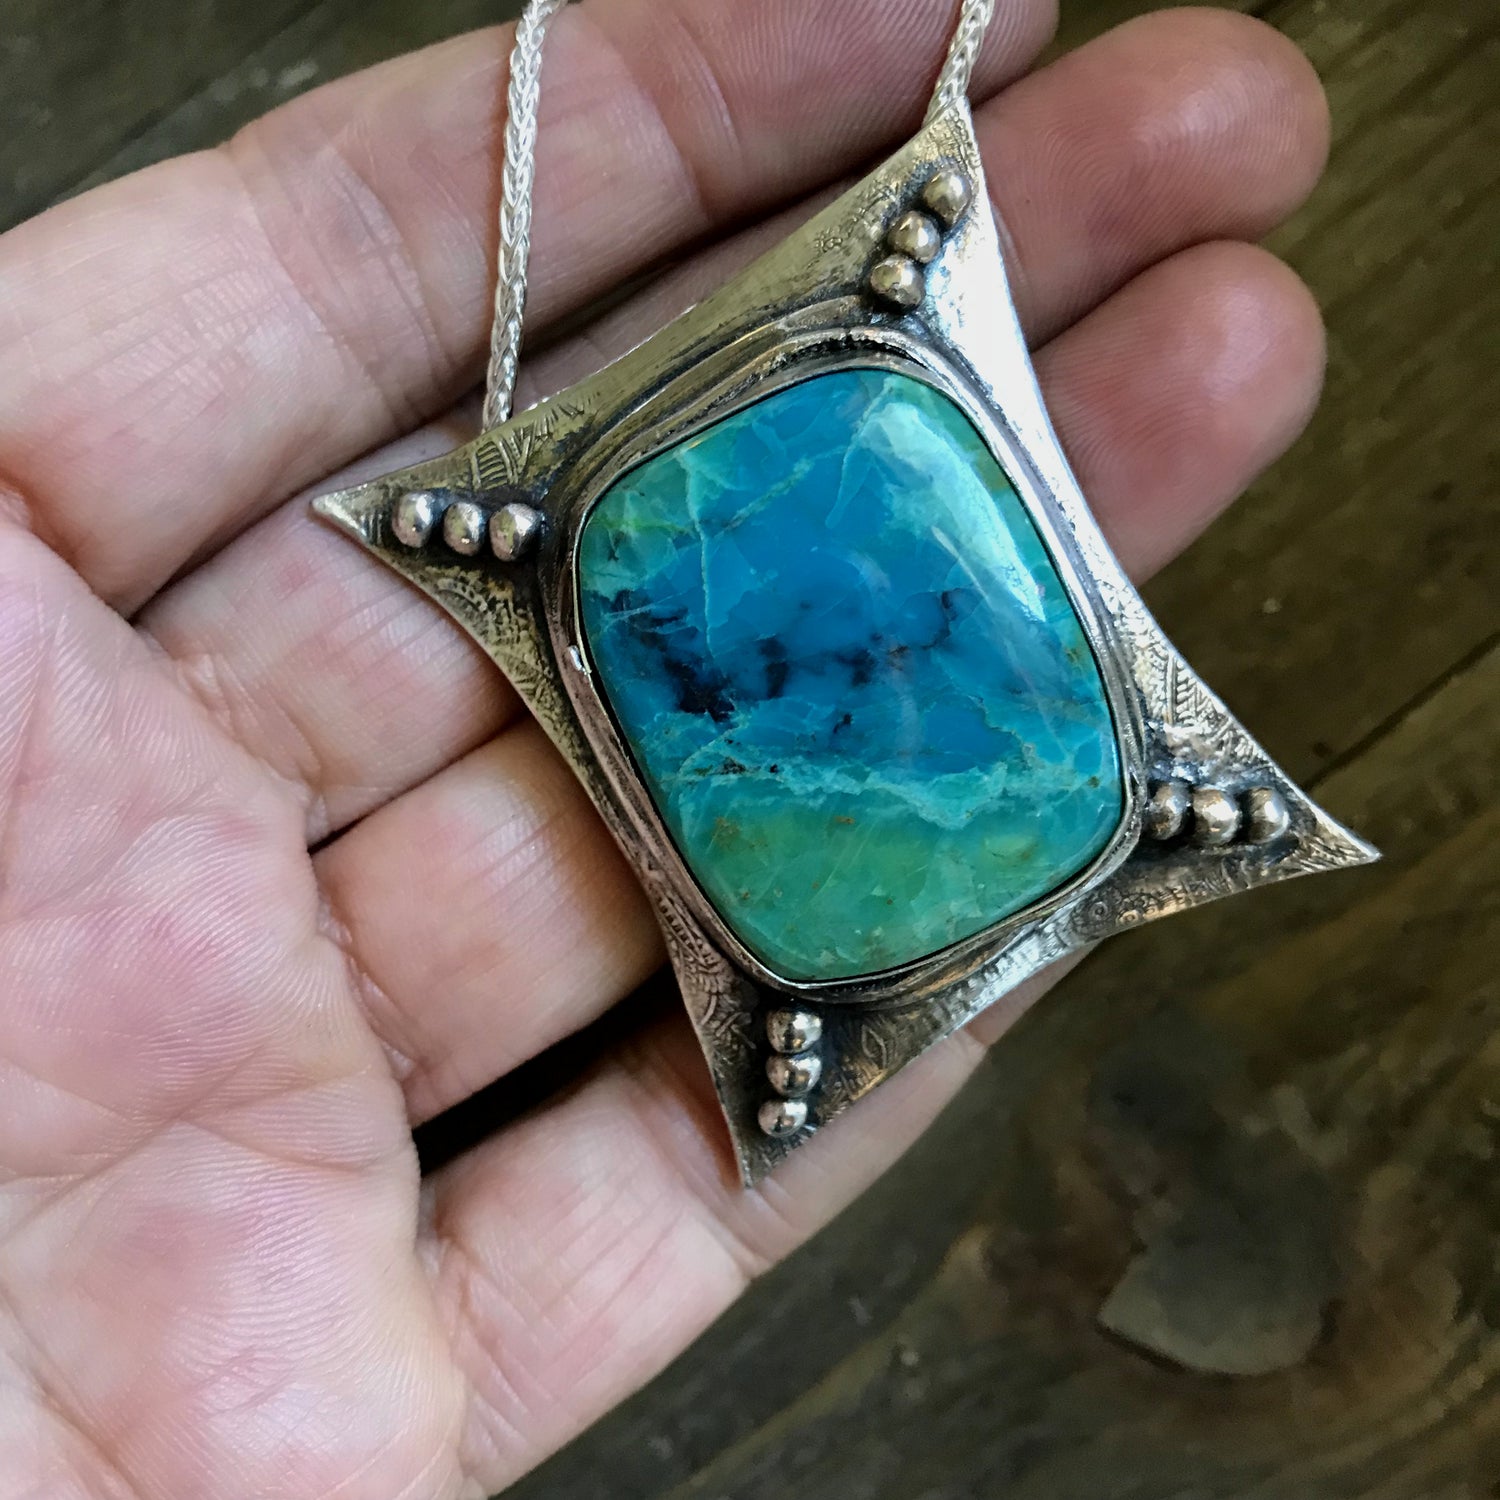 Sterling Silver Pendant Chrysocolla Necklace. One of a kind fully handmade sterling silver art jewelry necklace with a spectacular vibrant blue green Chrysocolla (a.k.a "Peruvian Turquoise") stone. The polished sterling silver pendant was oxidized to give it an antique look.- Handcrafted - CosmicDeva